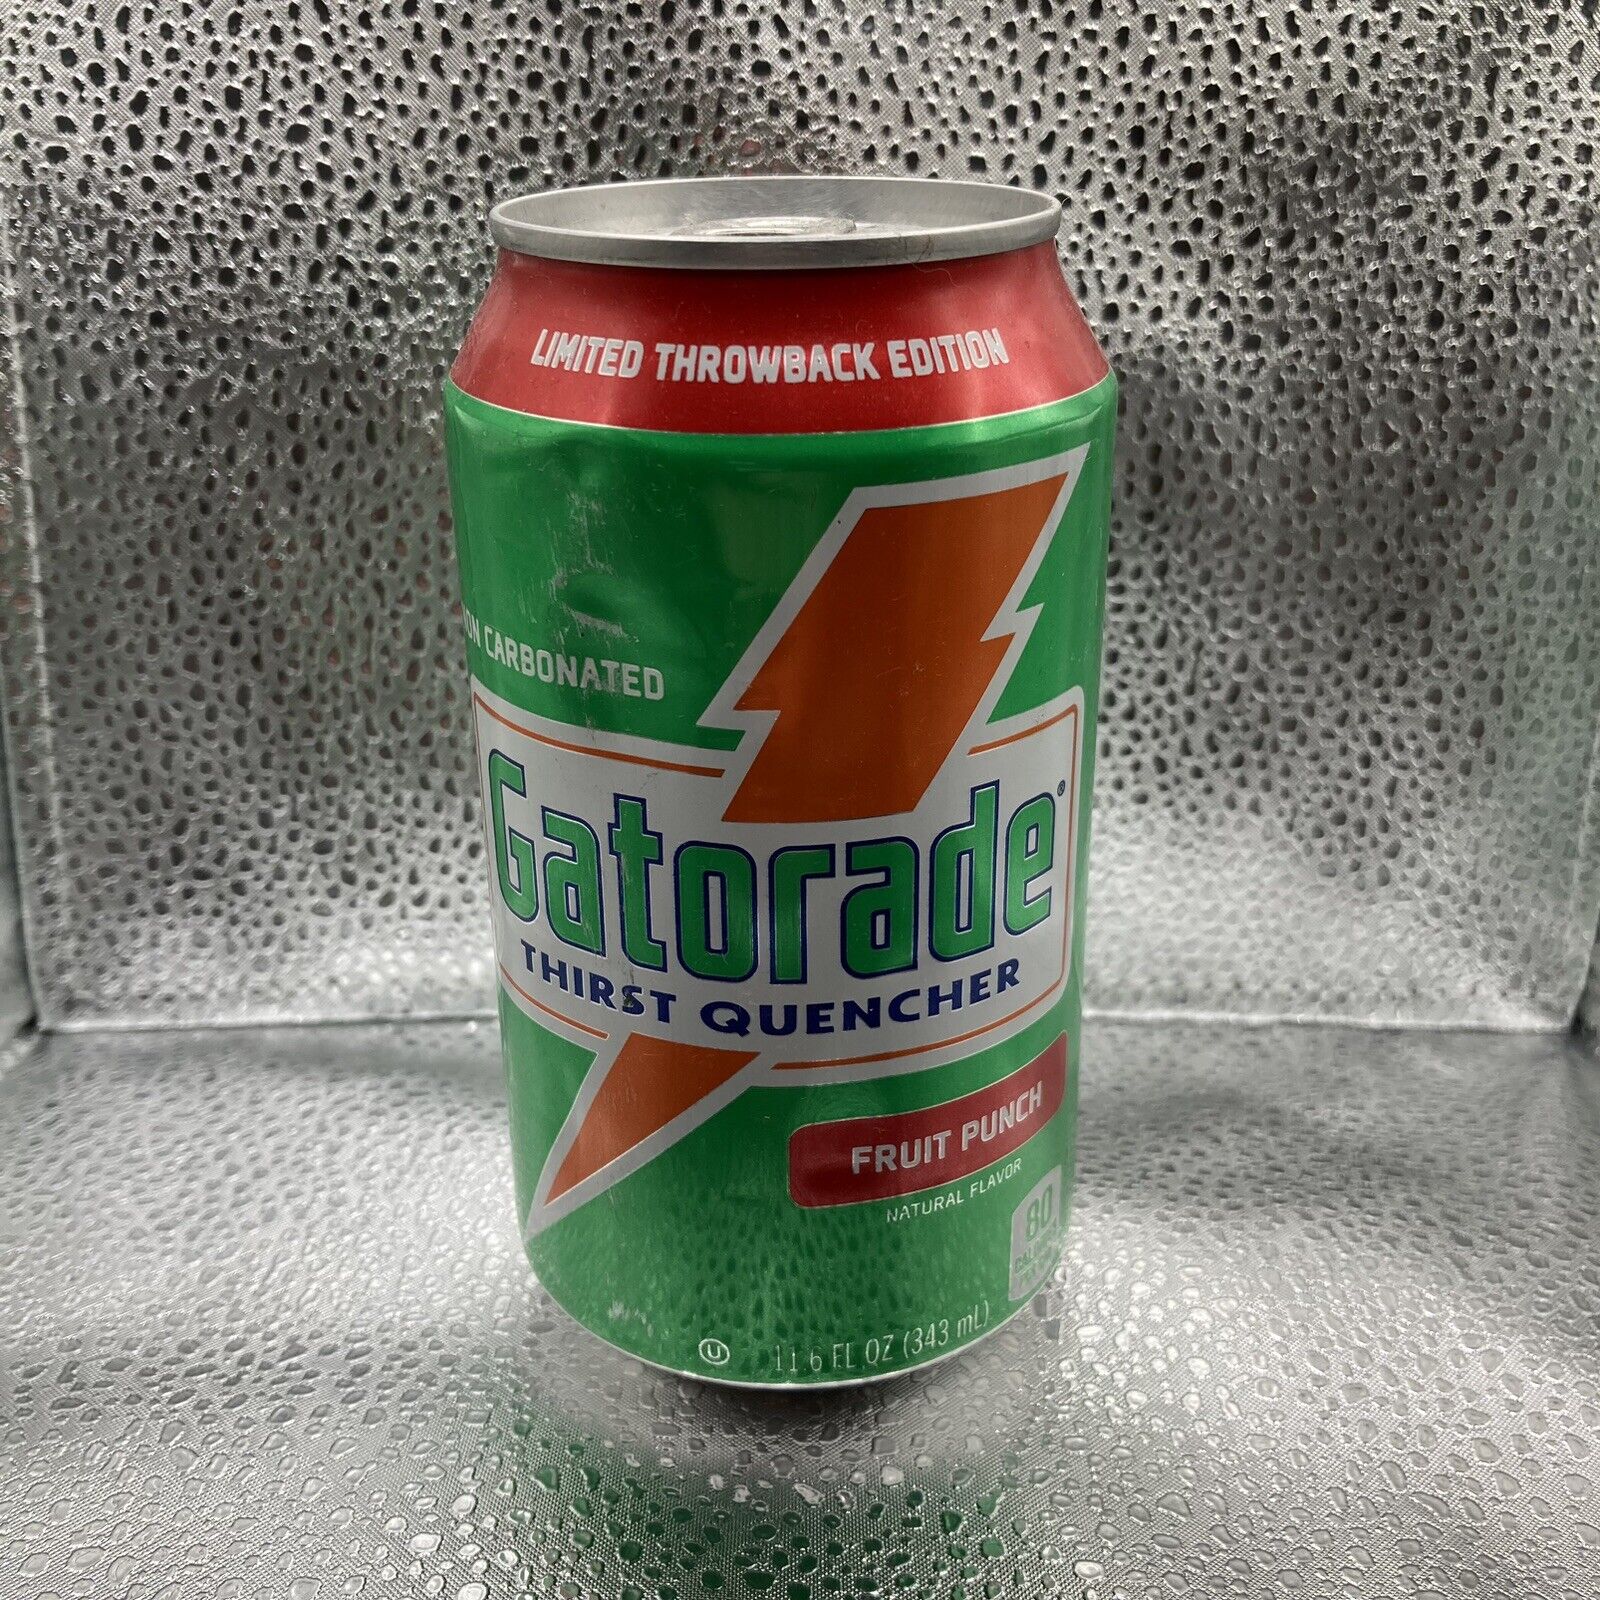 Gatorade Thirst Quencher Fruit Punch 11.6 oz Empty Top Opened Green Can